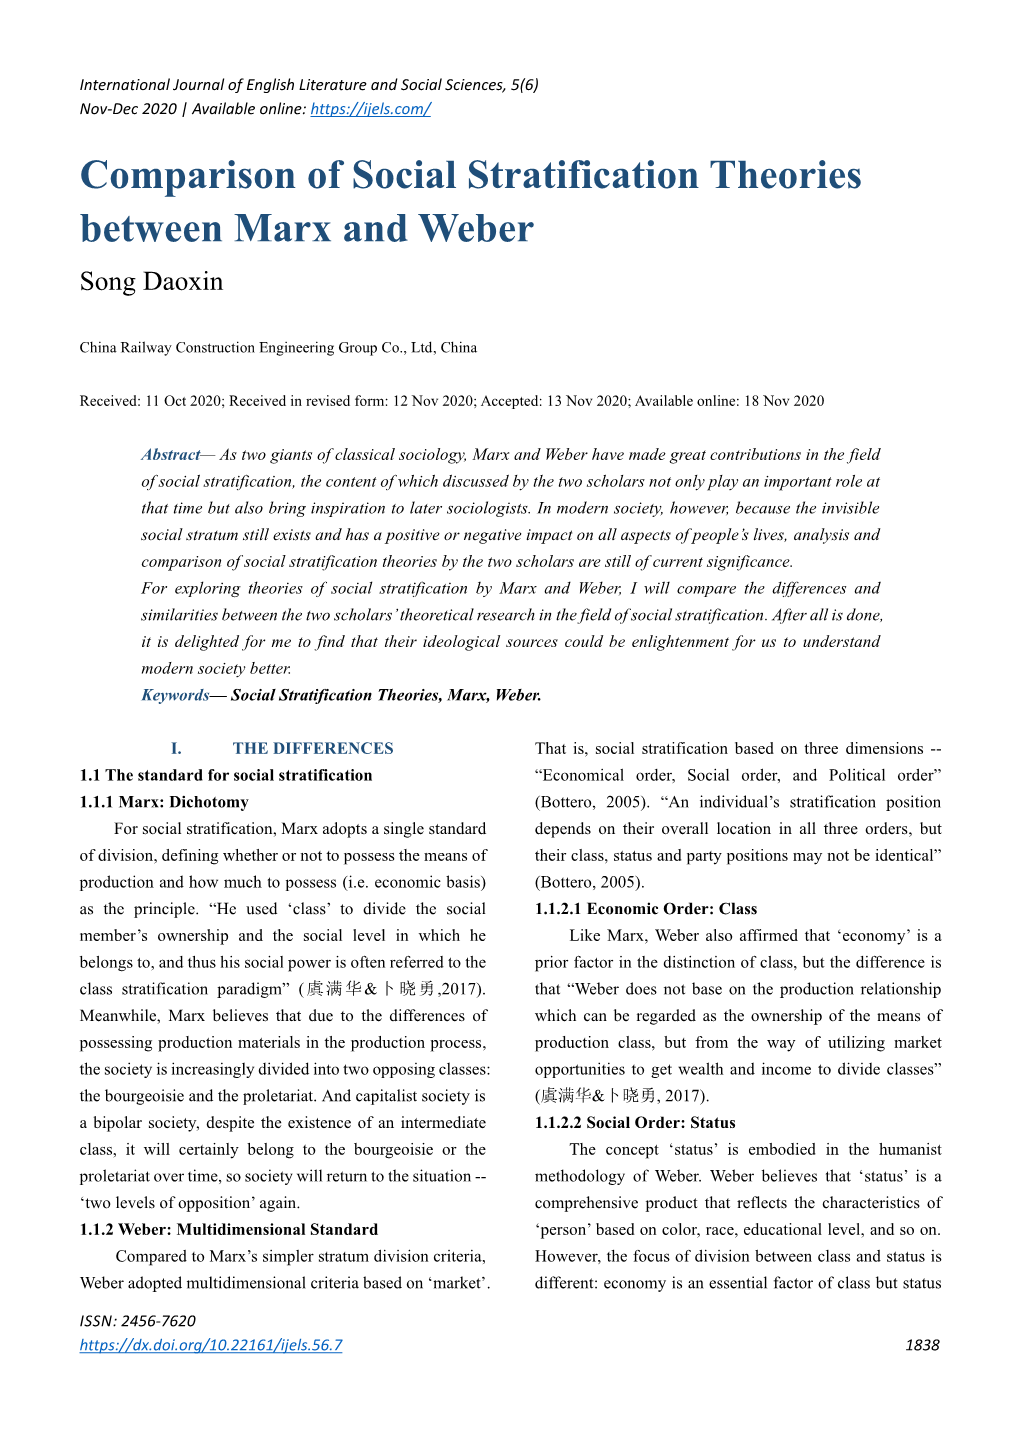 Comparison of Social Stratification Theories Between Marx and Weber Song Daoxin